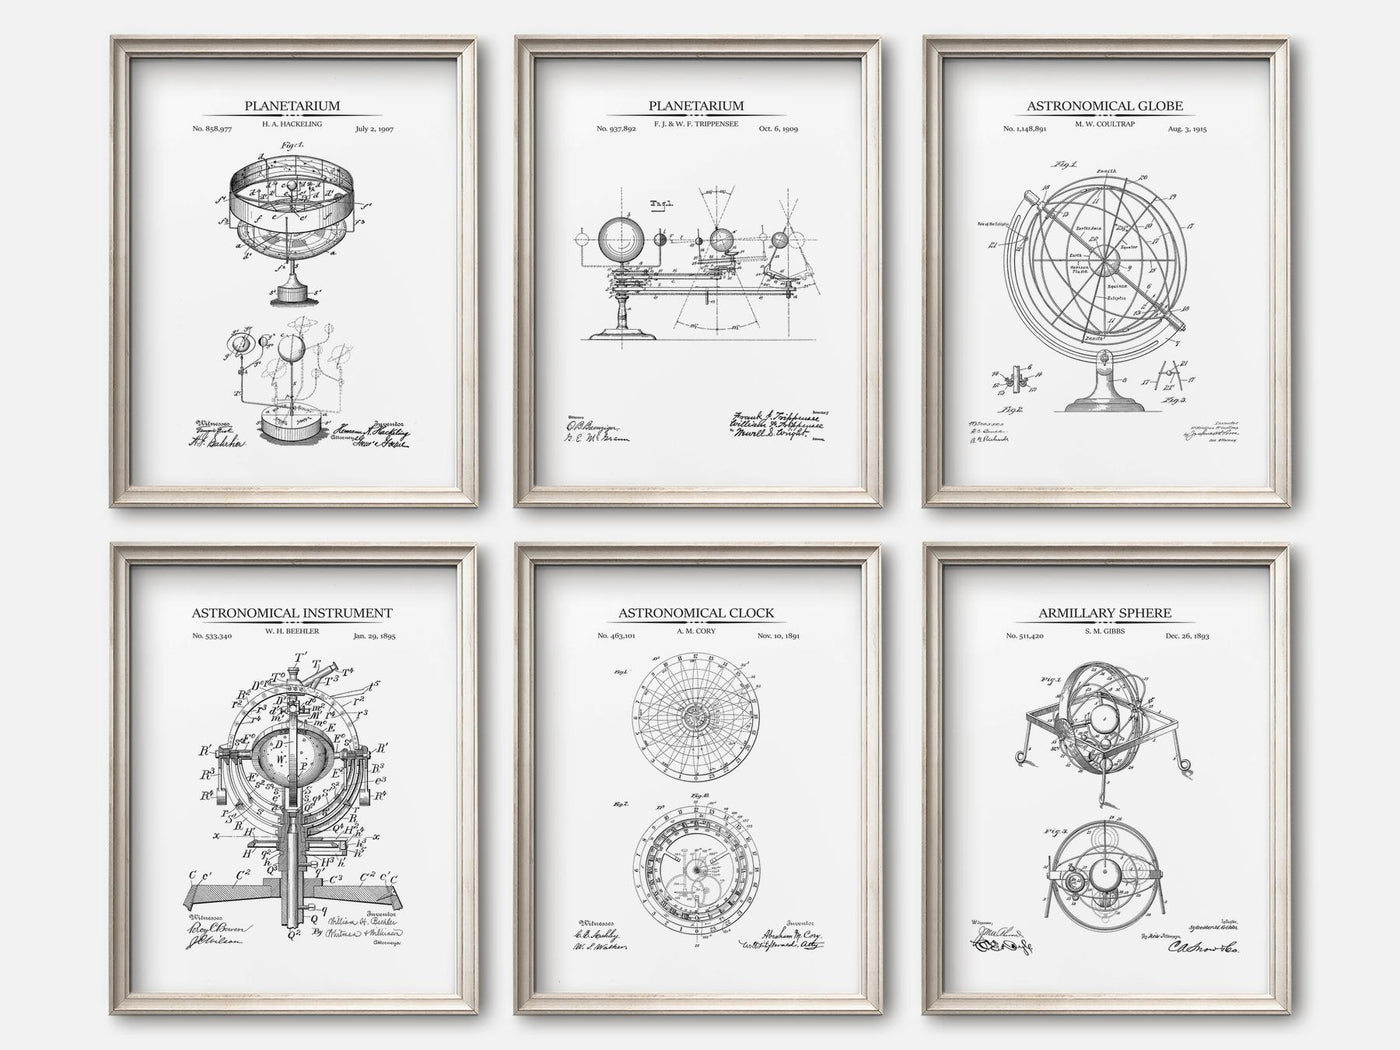 Astronomy Patent Print Set of 6 mockup - A_t10128-V1-PC_F+O-SS_6-PS_5x7-C_whi variant